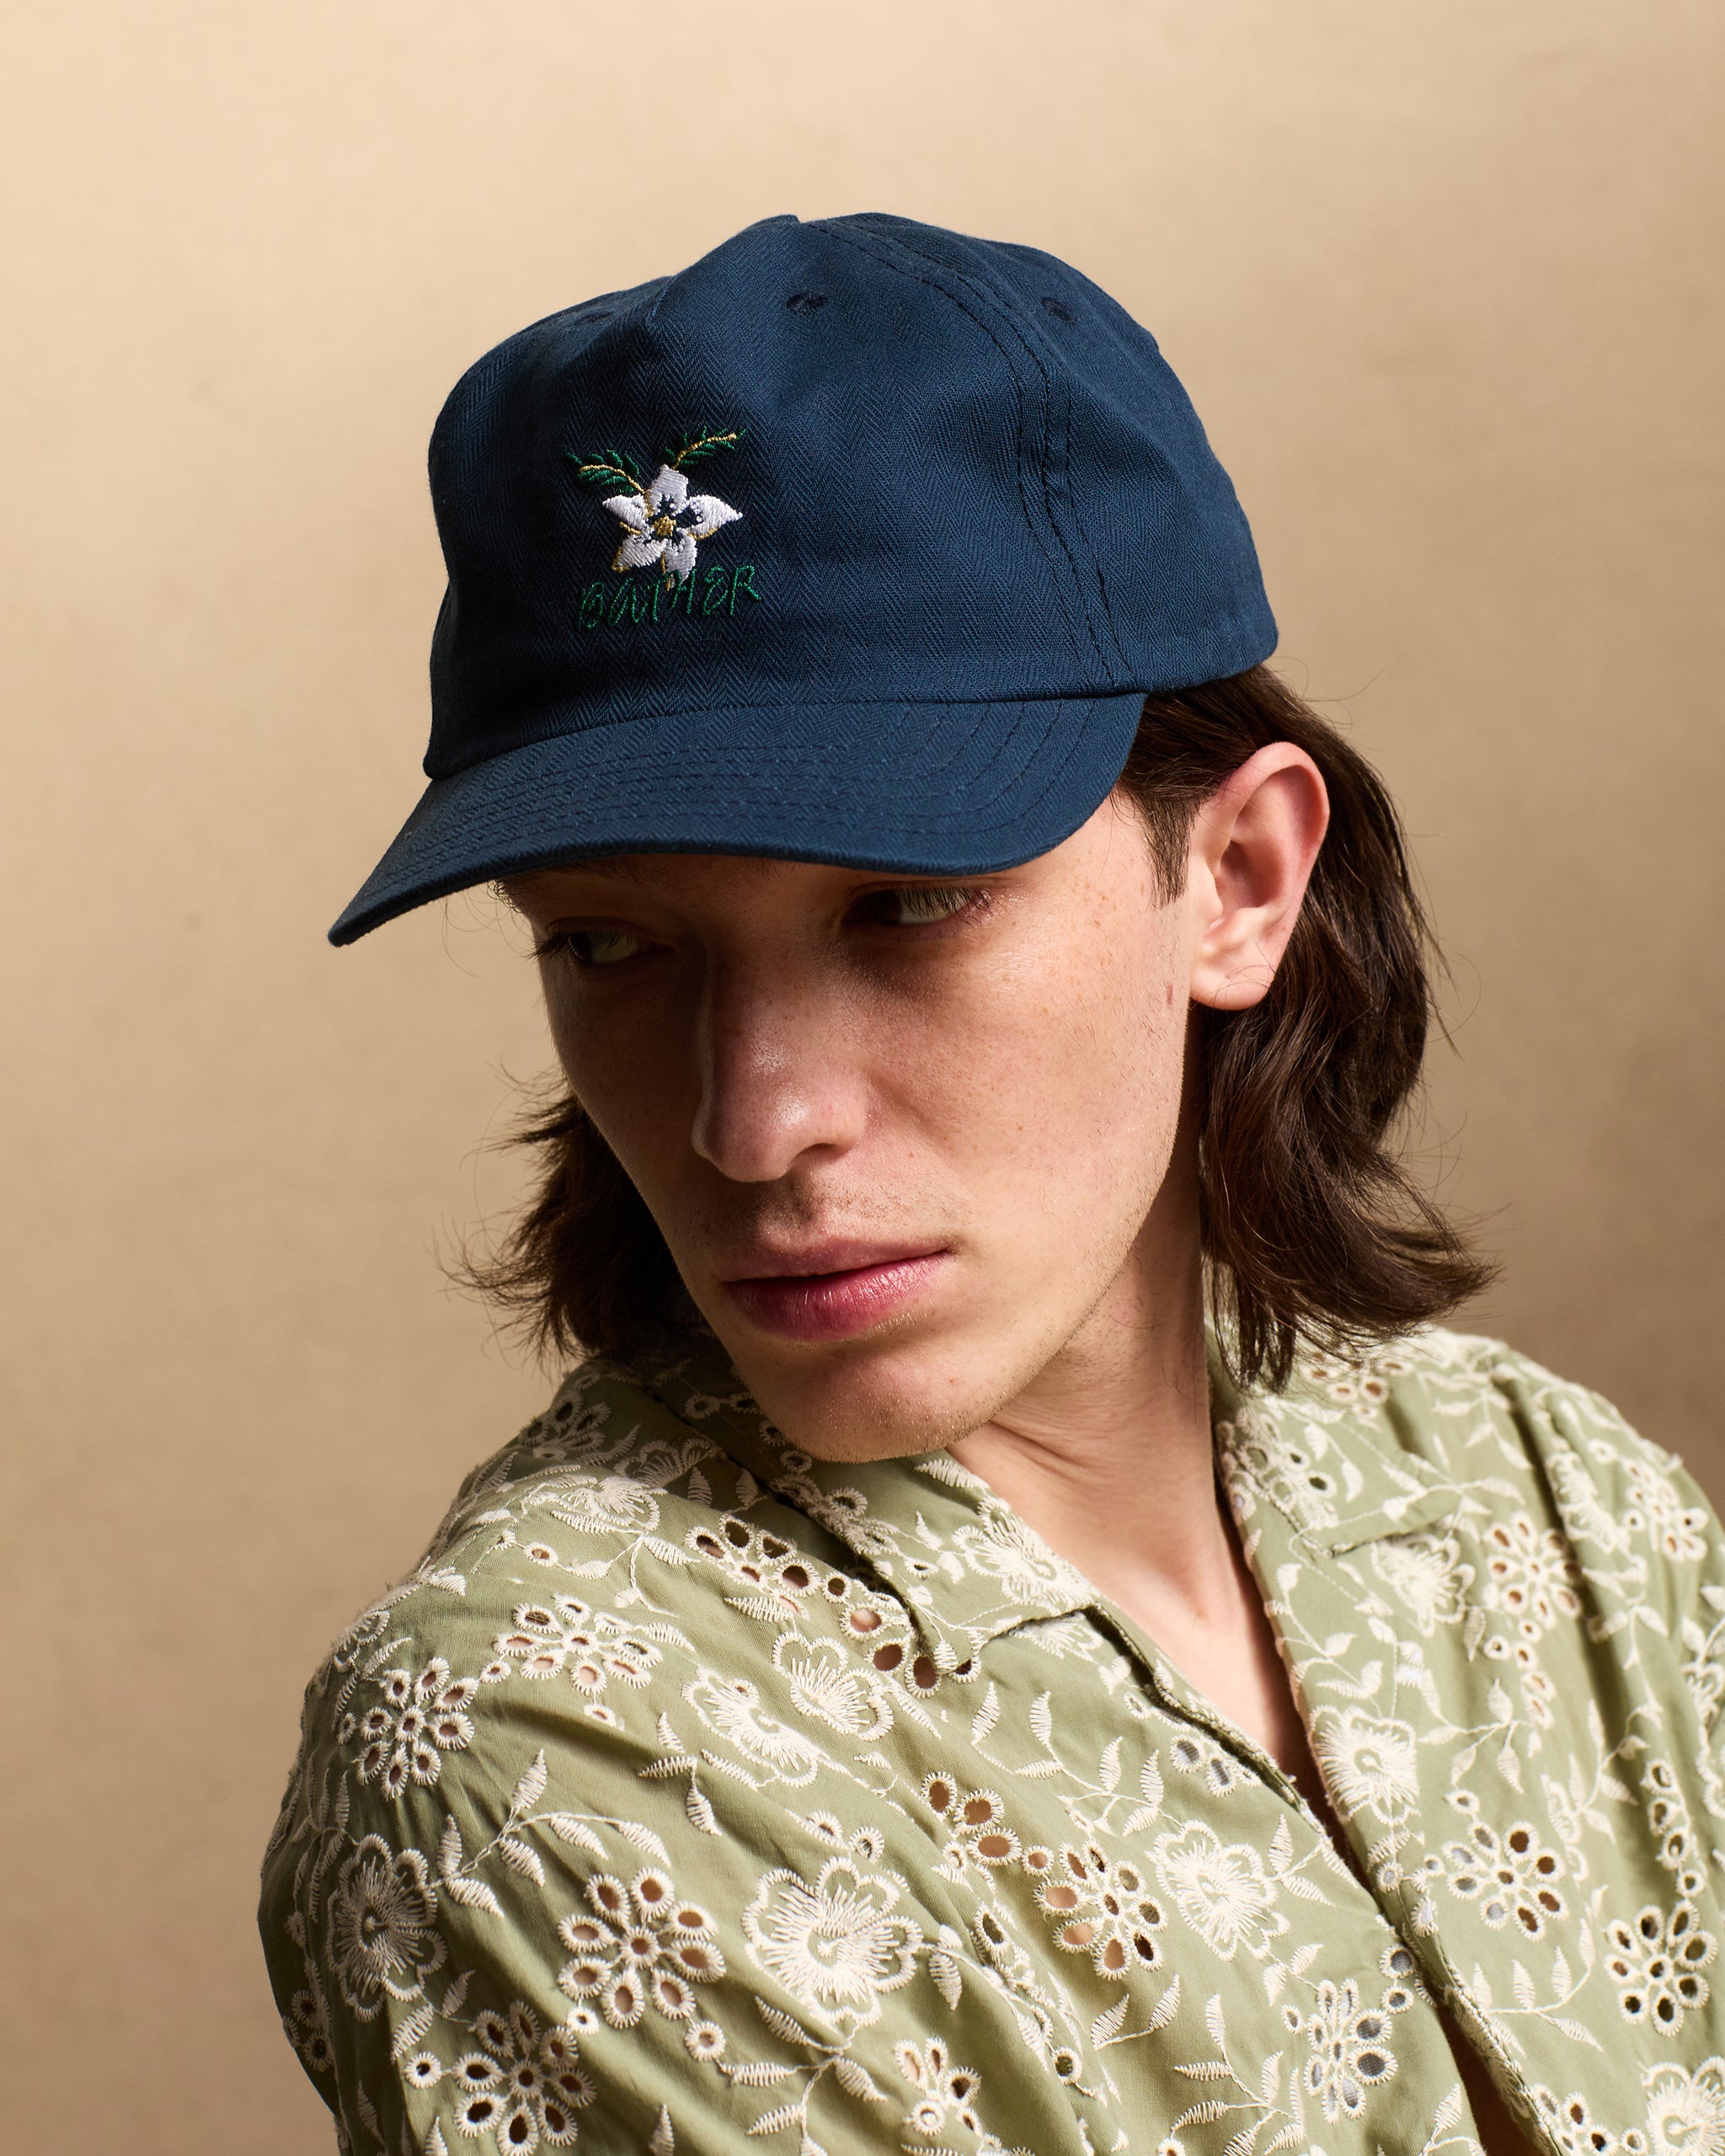 model wearing Dove Herringbone 5 Panel Cap with floral embroidered pattern